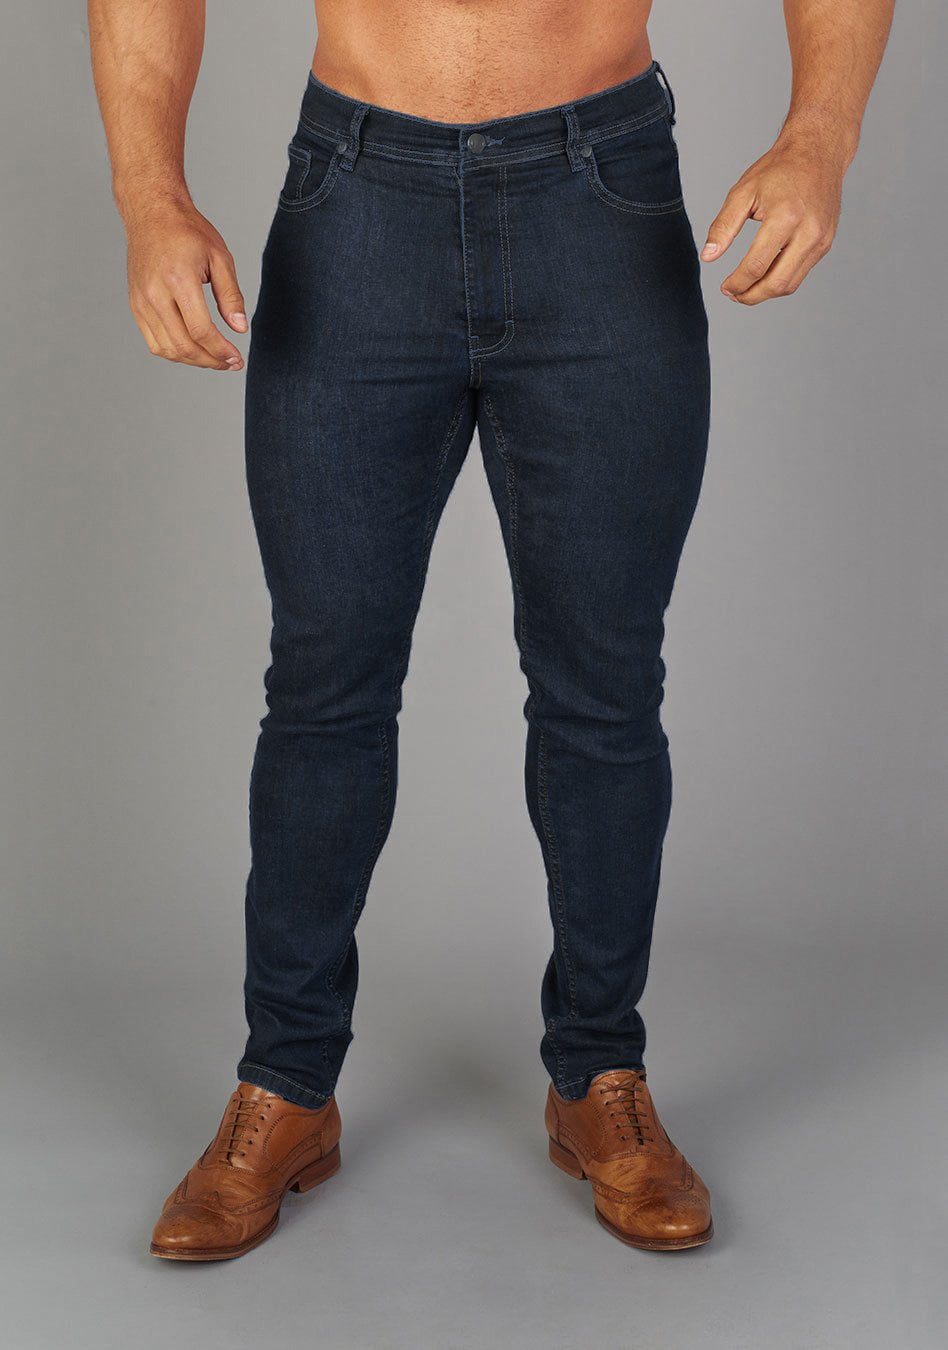 Navy Athletic Fit Jeans by Oxcloth, tailored for muscular physiques, offering comfort and flexibility. Perfect combination of style and function for those seeking muscle fit jeans.